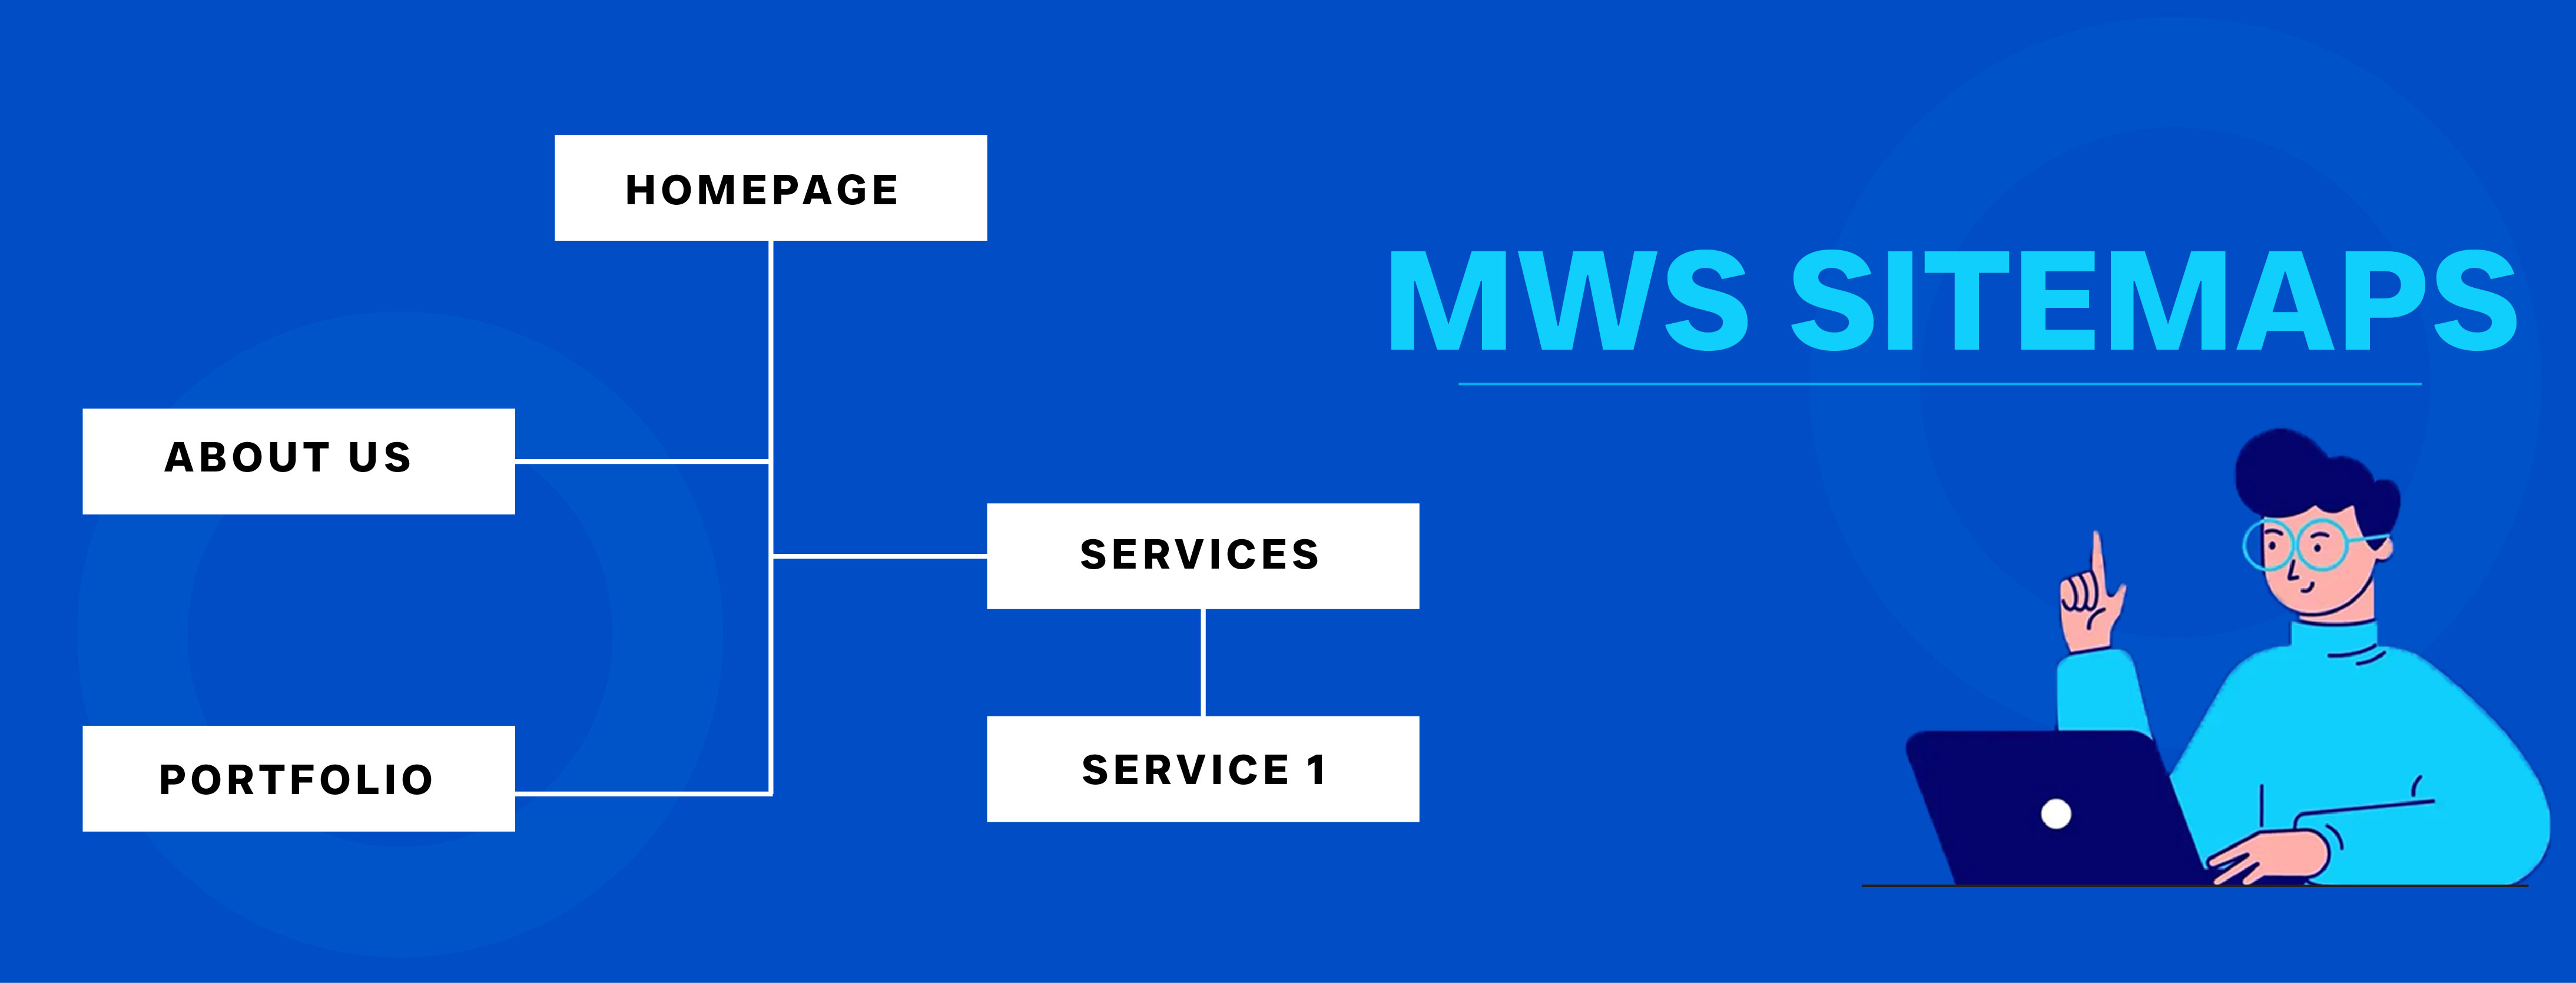 MWS Sitemaps: Your Personal Guide to Google Crawler, an IT solutions provider, and and search engine crawling schedules efficiently.  search engine crawlers., Advanced Web Development Company in noida, Delhi ncr, Mumbai, Gurugram, Bangalore, India, Website Design & Development Company  in noida, Delhi ncr, Mumbai, Gurugram, Bangalore, India, Website Design & Development Company  in noida, Delhi ncr, Mumbai, Gurugram, Bangalore, India, Website Design & Development Services in noida, Delhi ncr, Mumbai, Gurugram, Bangalore, India Web Design & Development Agency in India in noida, Delhi ncr, Mumbai, Gurugram, Bangalore, India, Website Development Compoany in India in noida, Delhi ncr, Mumbai, Gurugram, Bangalore, India Website Design Company in India in noida, Delhi ncr, Mumbai, Gurugram, Bangalore, India, Website Design Company  in noida, Delhi ncr, Mumbai, Gurugram, Bangalore, India, Website Design Service Agency  in noida, Delhi ncr, Mumbai, Gurugram, Bangalore, India, Website Designing Company  in noida, Delhi ncr, Mumbai, Gurugram, Bangalore, India, Web Design Company  in noida, Delhi ncr, Mumbai, Gurugram, Bangalore, India,  Web Applications Development Agency  in noida, Delhi ncr, Mumbai, Gurugram, Bangalore, India, App Development Agency in noida, Delhi ncr, Mumbai, Gurugram, Bangalore, India, Web Application Development Company in noida, Delhi ncr, Mumbai, Gurugram, Bangalore, India,  Web Application Development Company  in noida, Delhi ncr, Mumbai, Gurugram, Bangalore, India